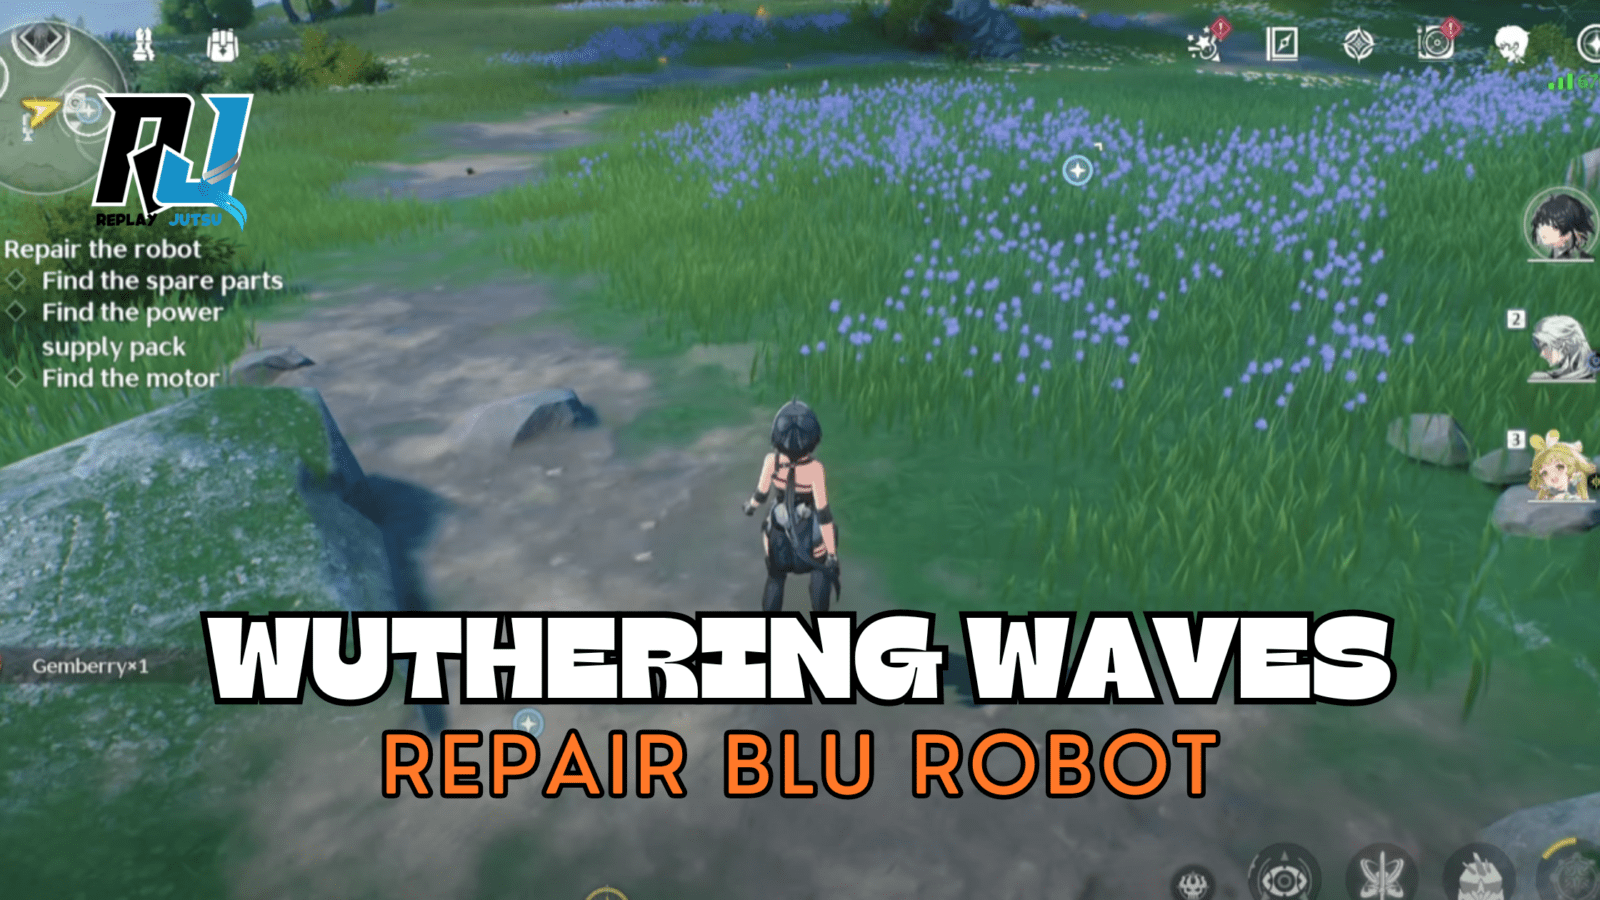 How To Repair The Robot (Blu) in Wuthering Waves - No Response Tonight